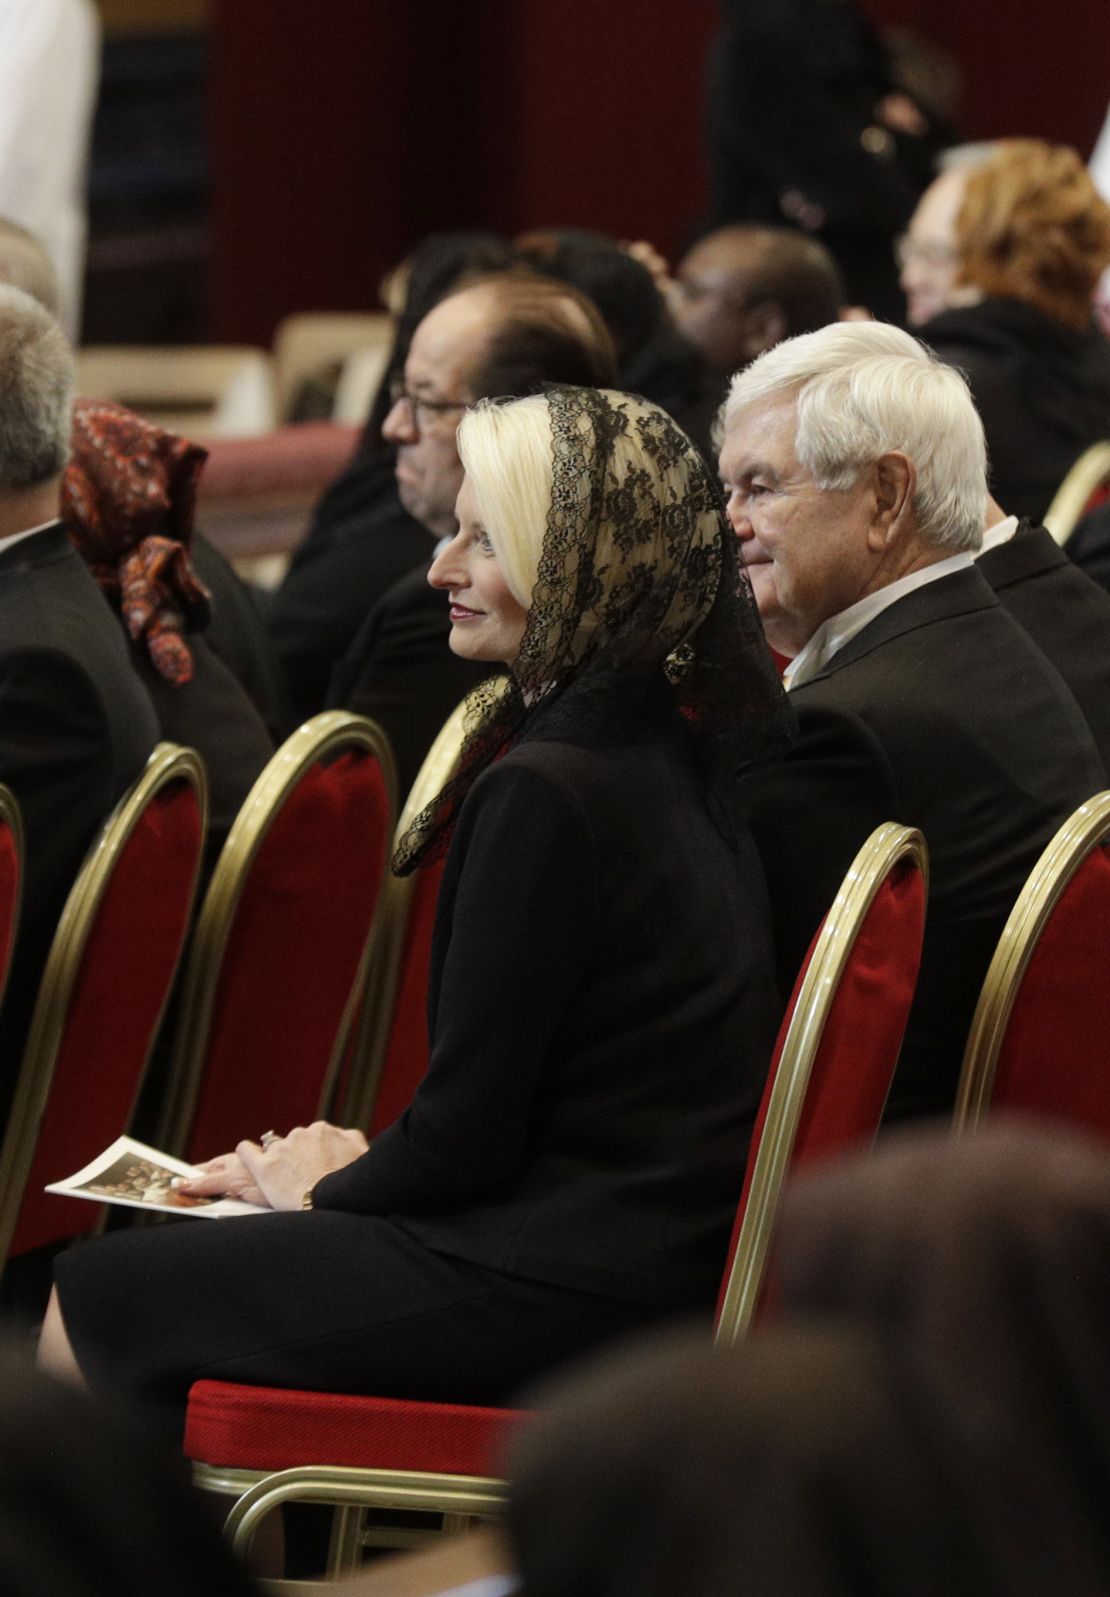 Callista Gingrich, the US ambassador-designate to the Holy See, and her husband, Newt Gingrich, attend a funeral service Thursday for Cardinal Bernard Law at St. Peter's Basilica.